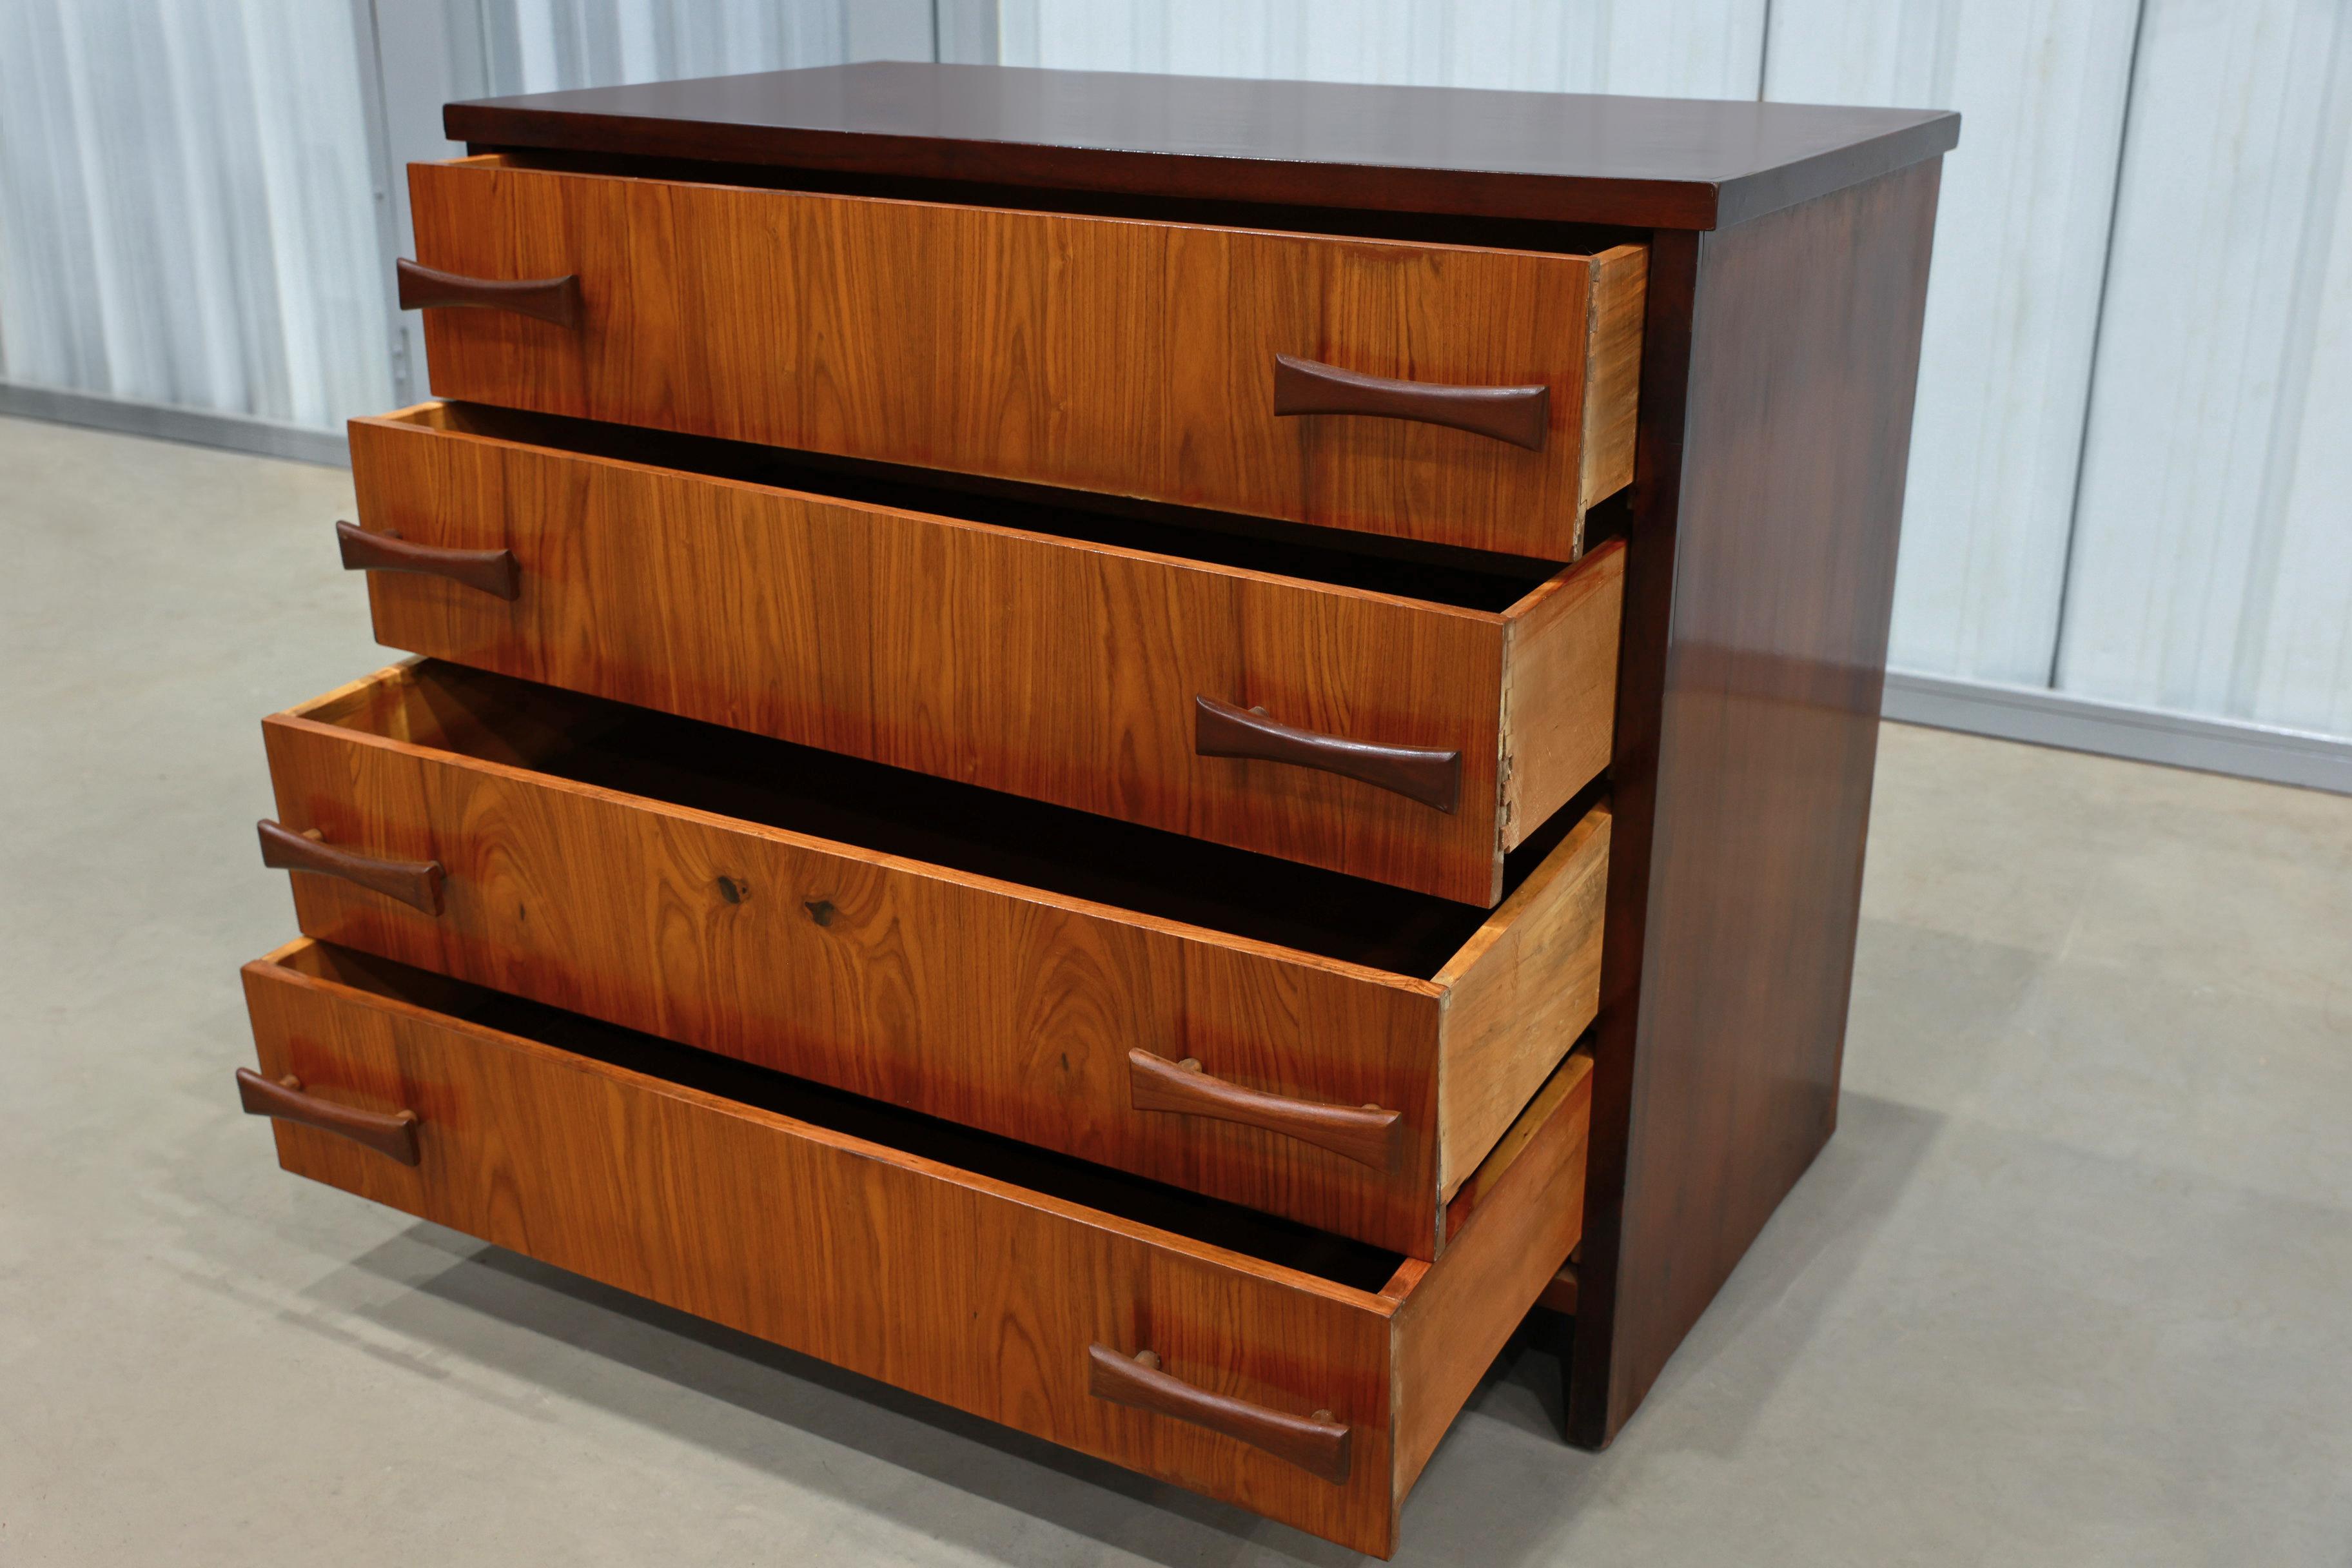 20th Century Mid-Century Modern Chest of Drawers in Caviuna wood, Unknown, c. 1950 For Sale